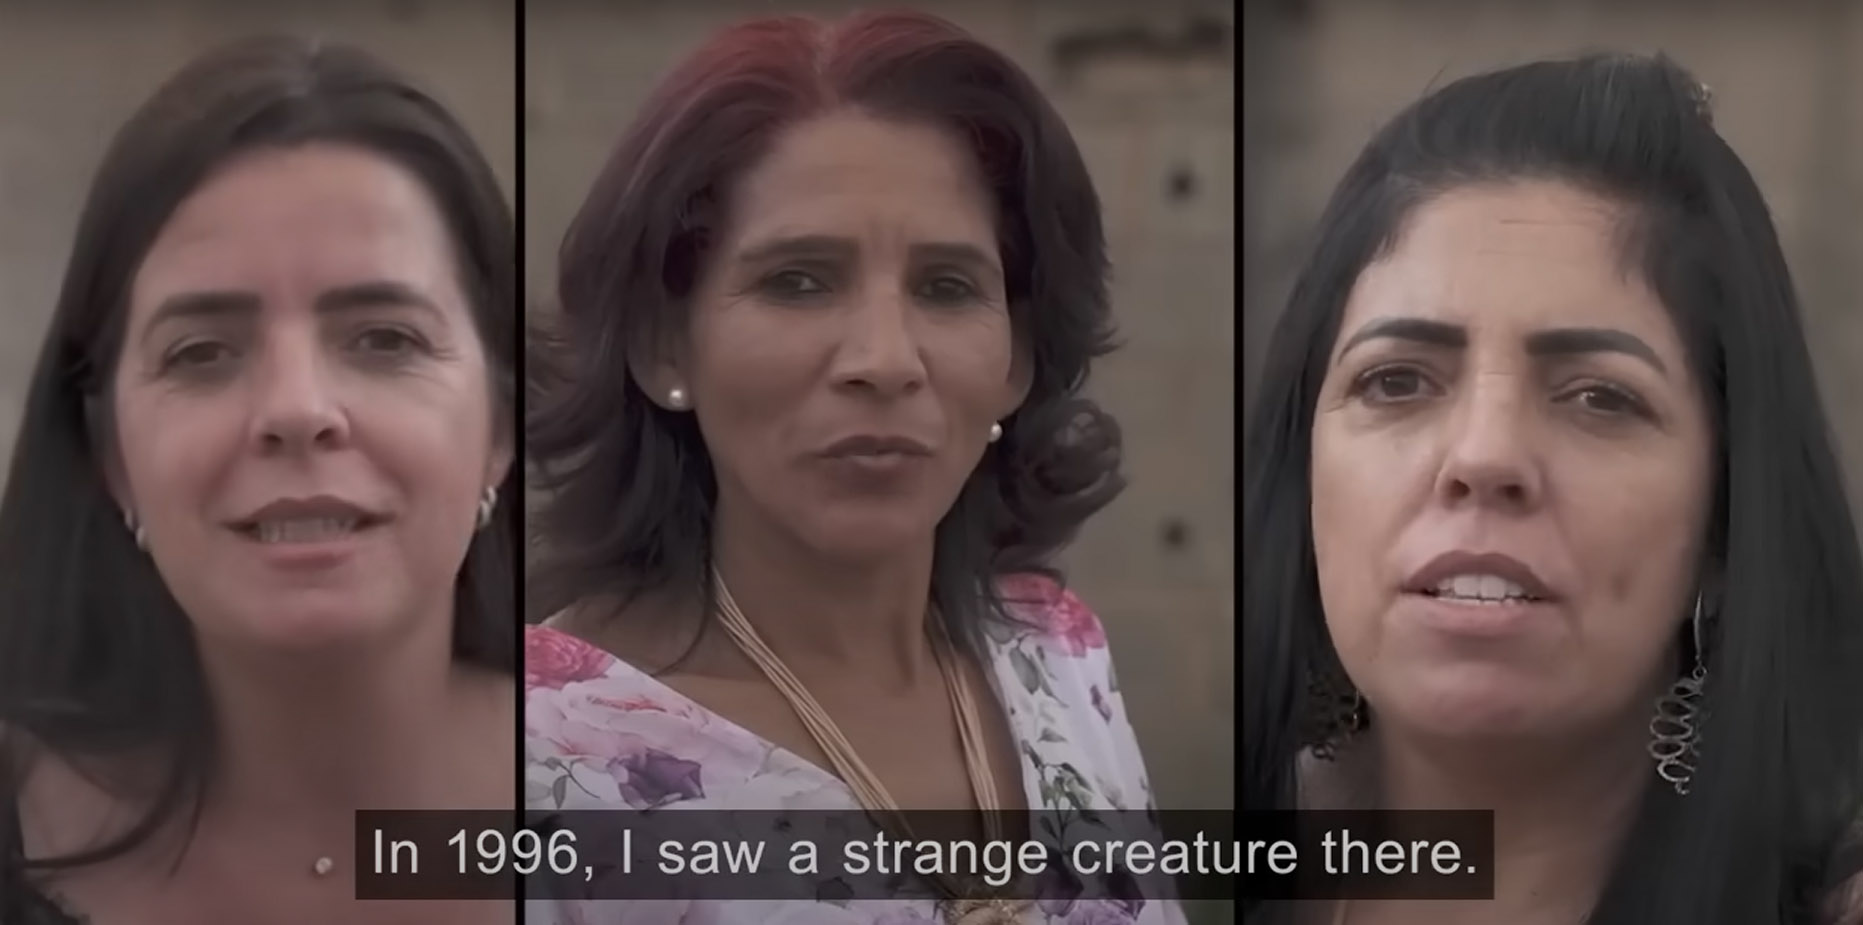 Liliane, Valquiria and Kátia reaffirmed their stories in the documentary Moment of Contact.